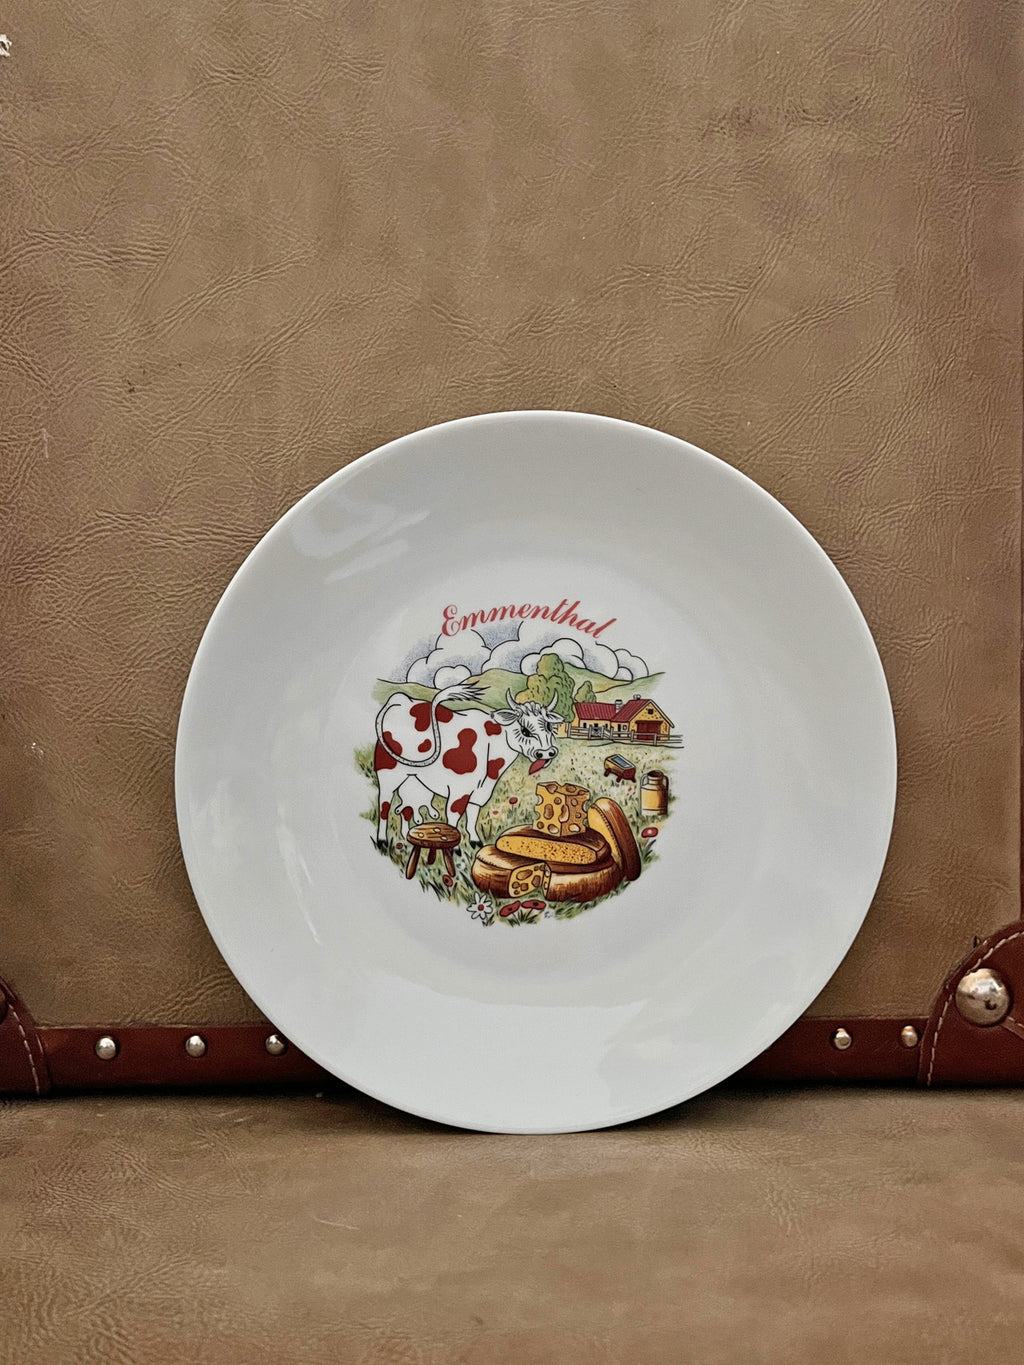 Vintage French Cheese Cow Plate by Limoges - Emmental